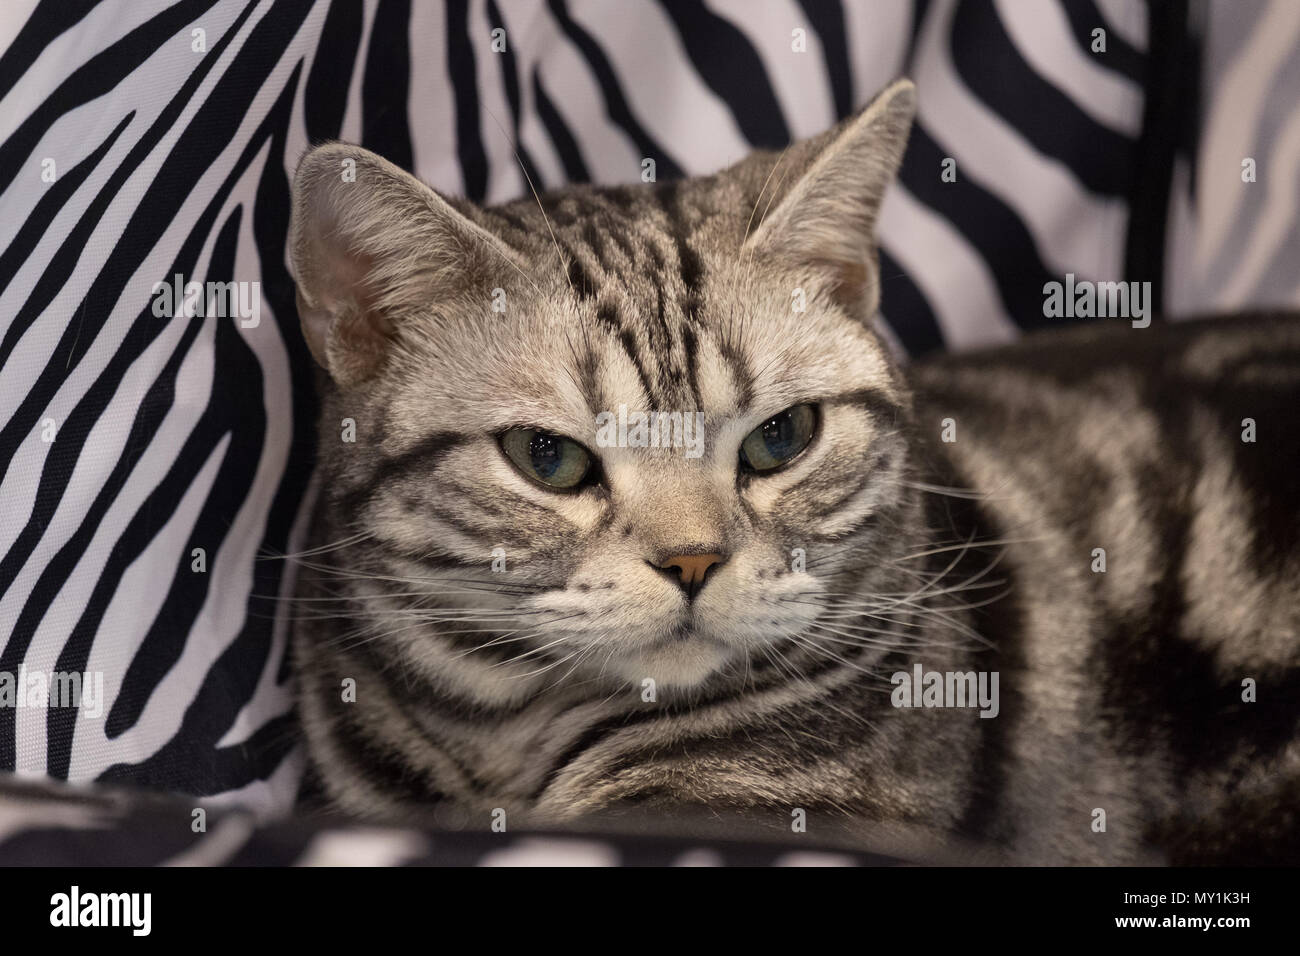 Adult British shorthair silver tabby cat portrait on black and white bicolor fabric background. Stock Photo